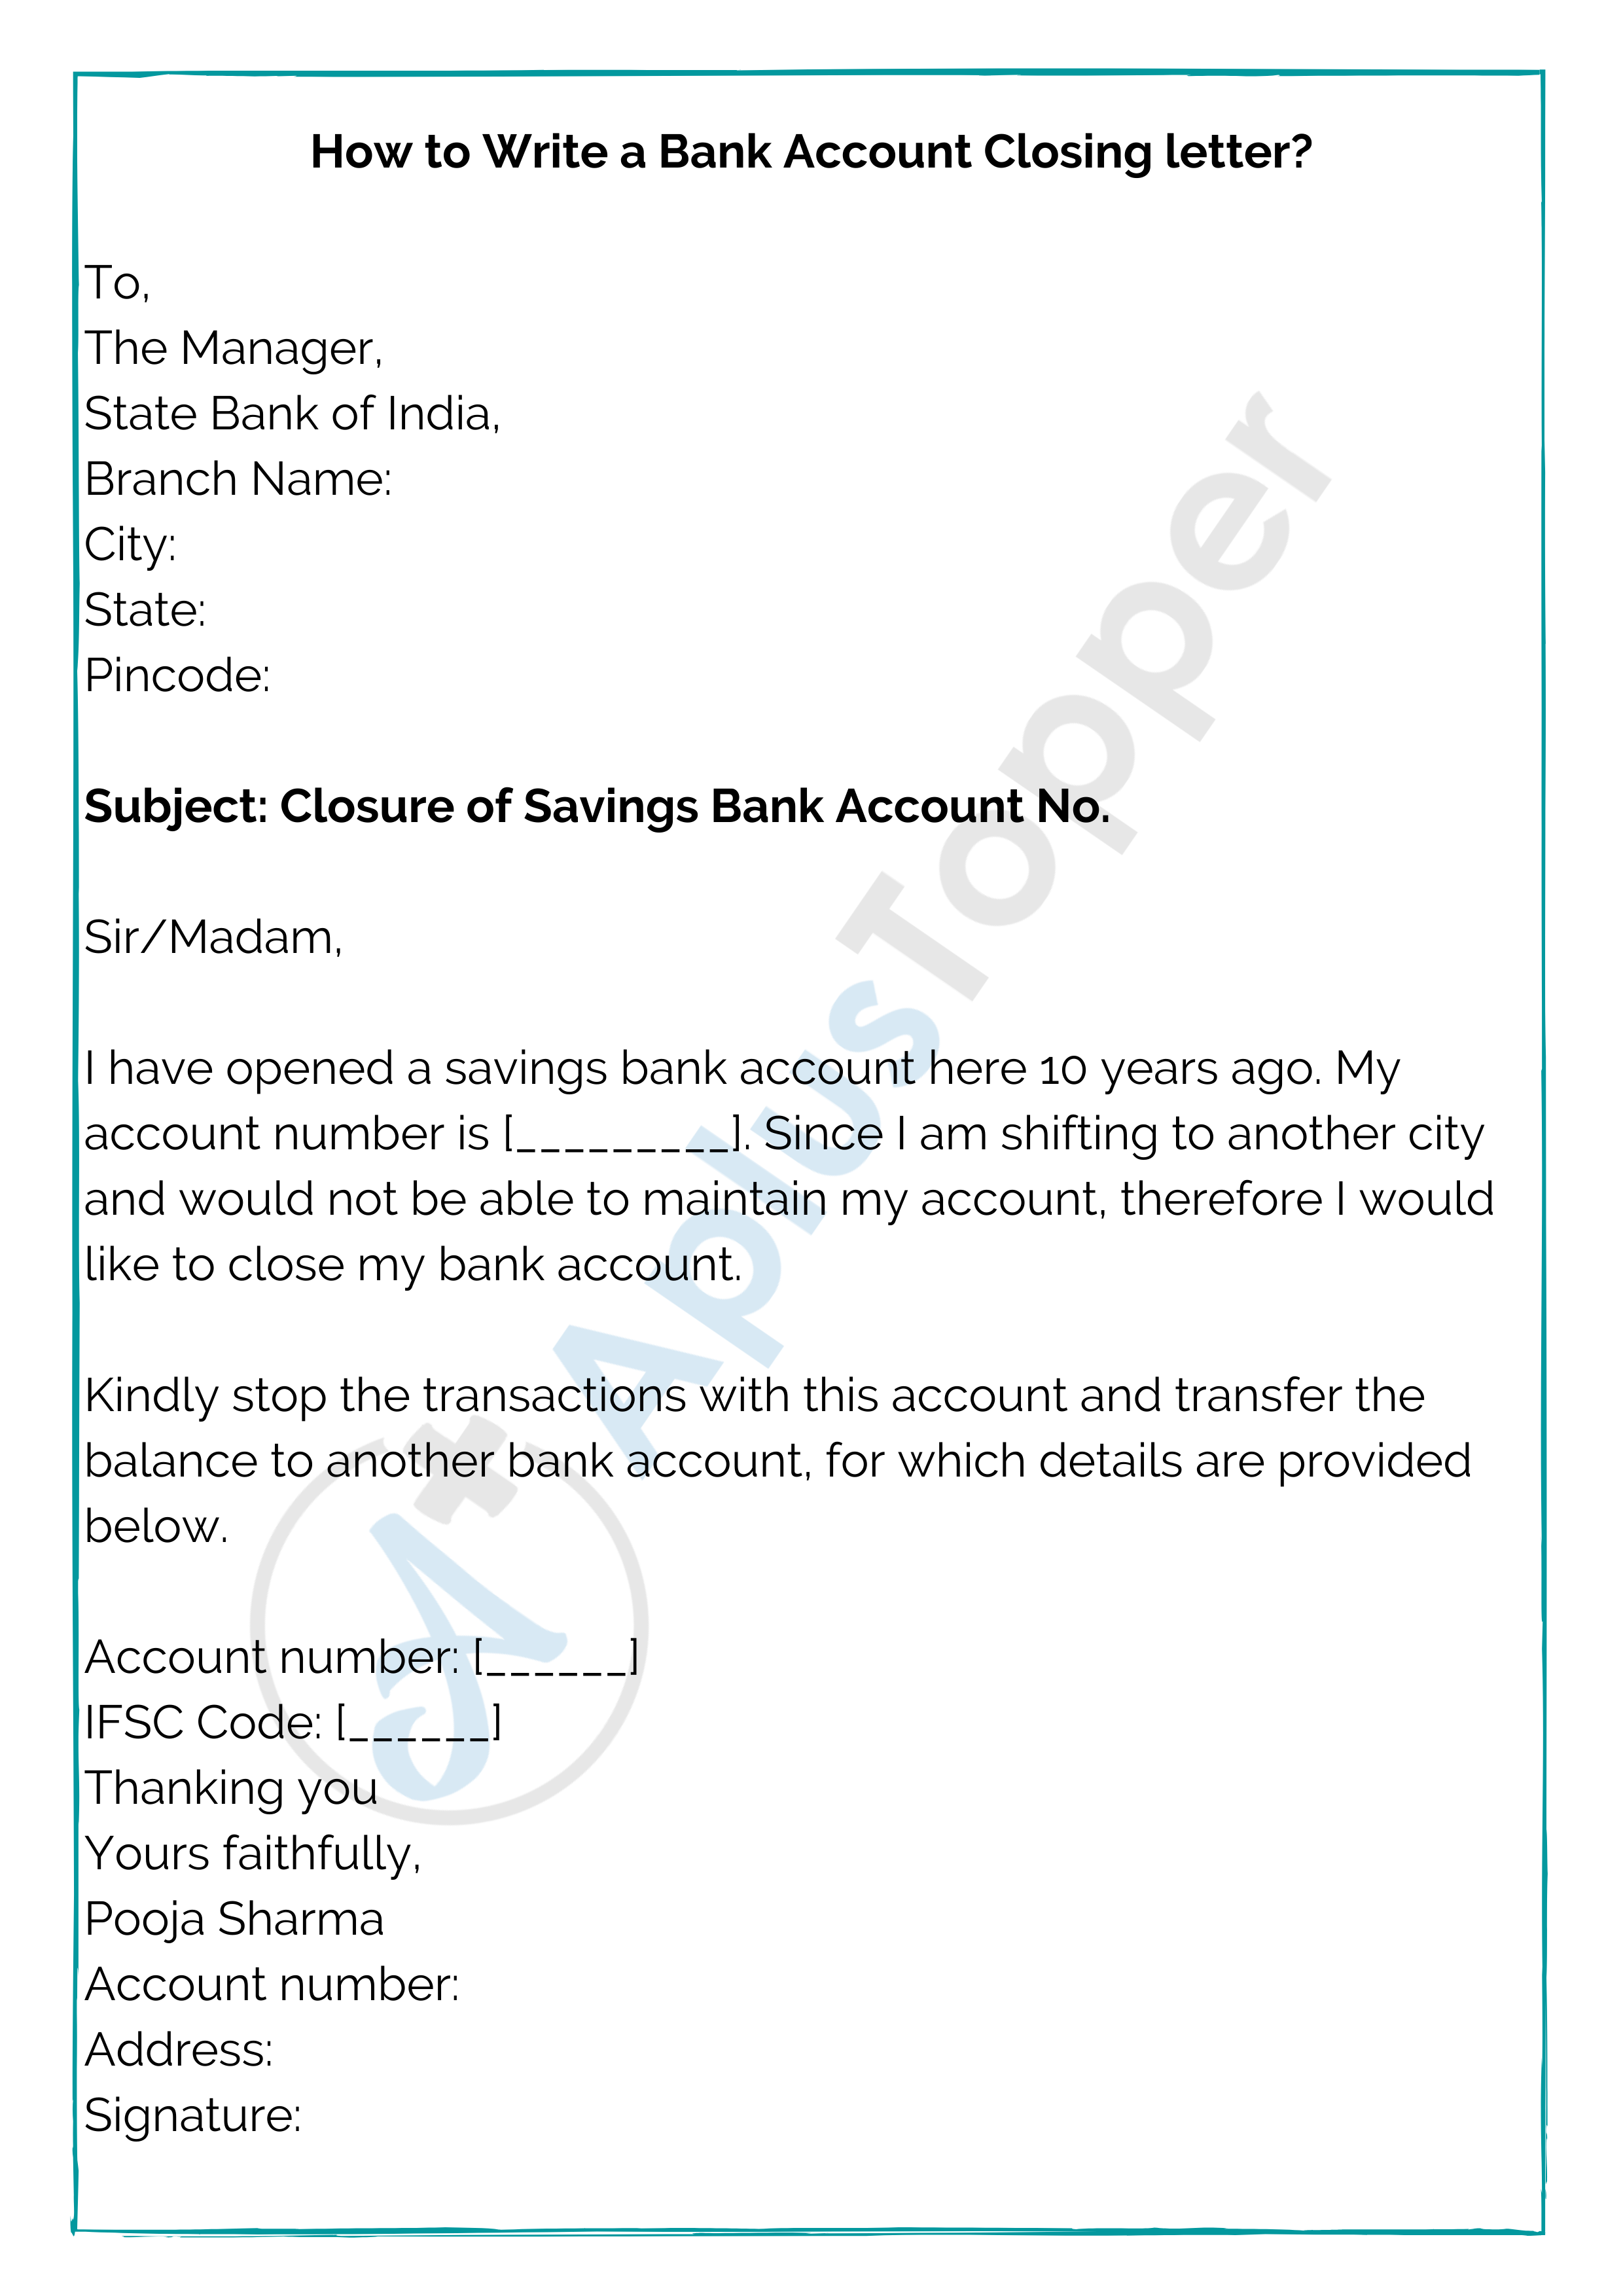 bank account closing application letter word format